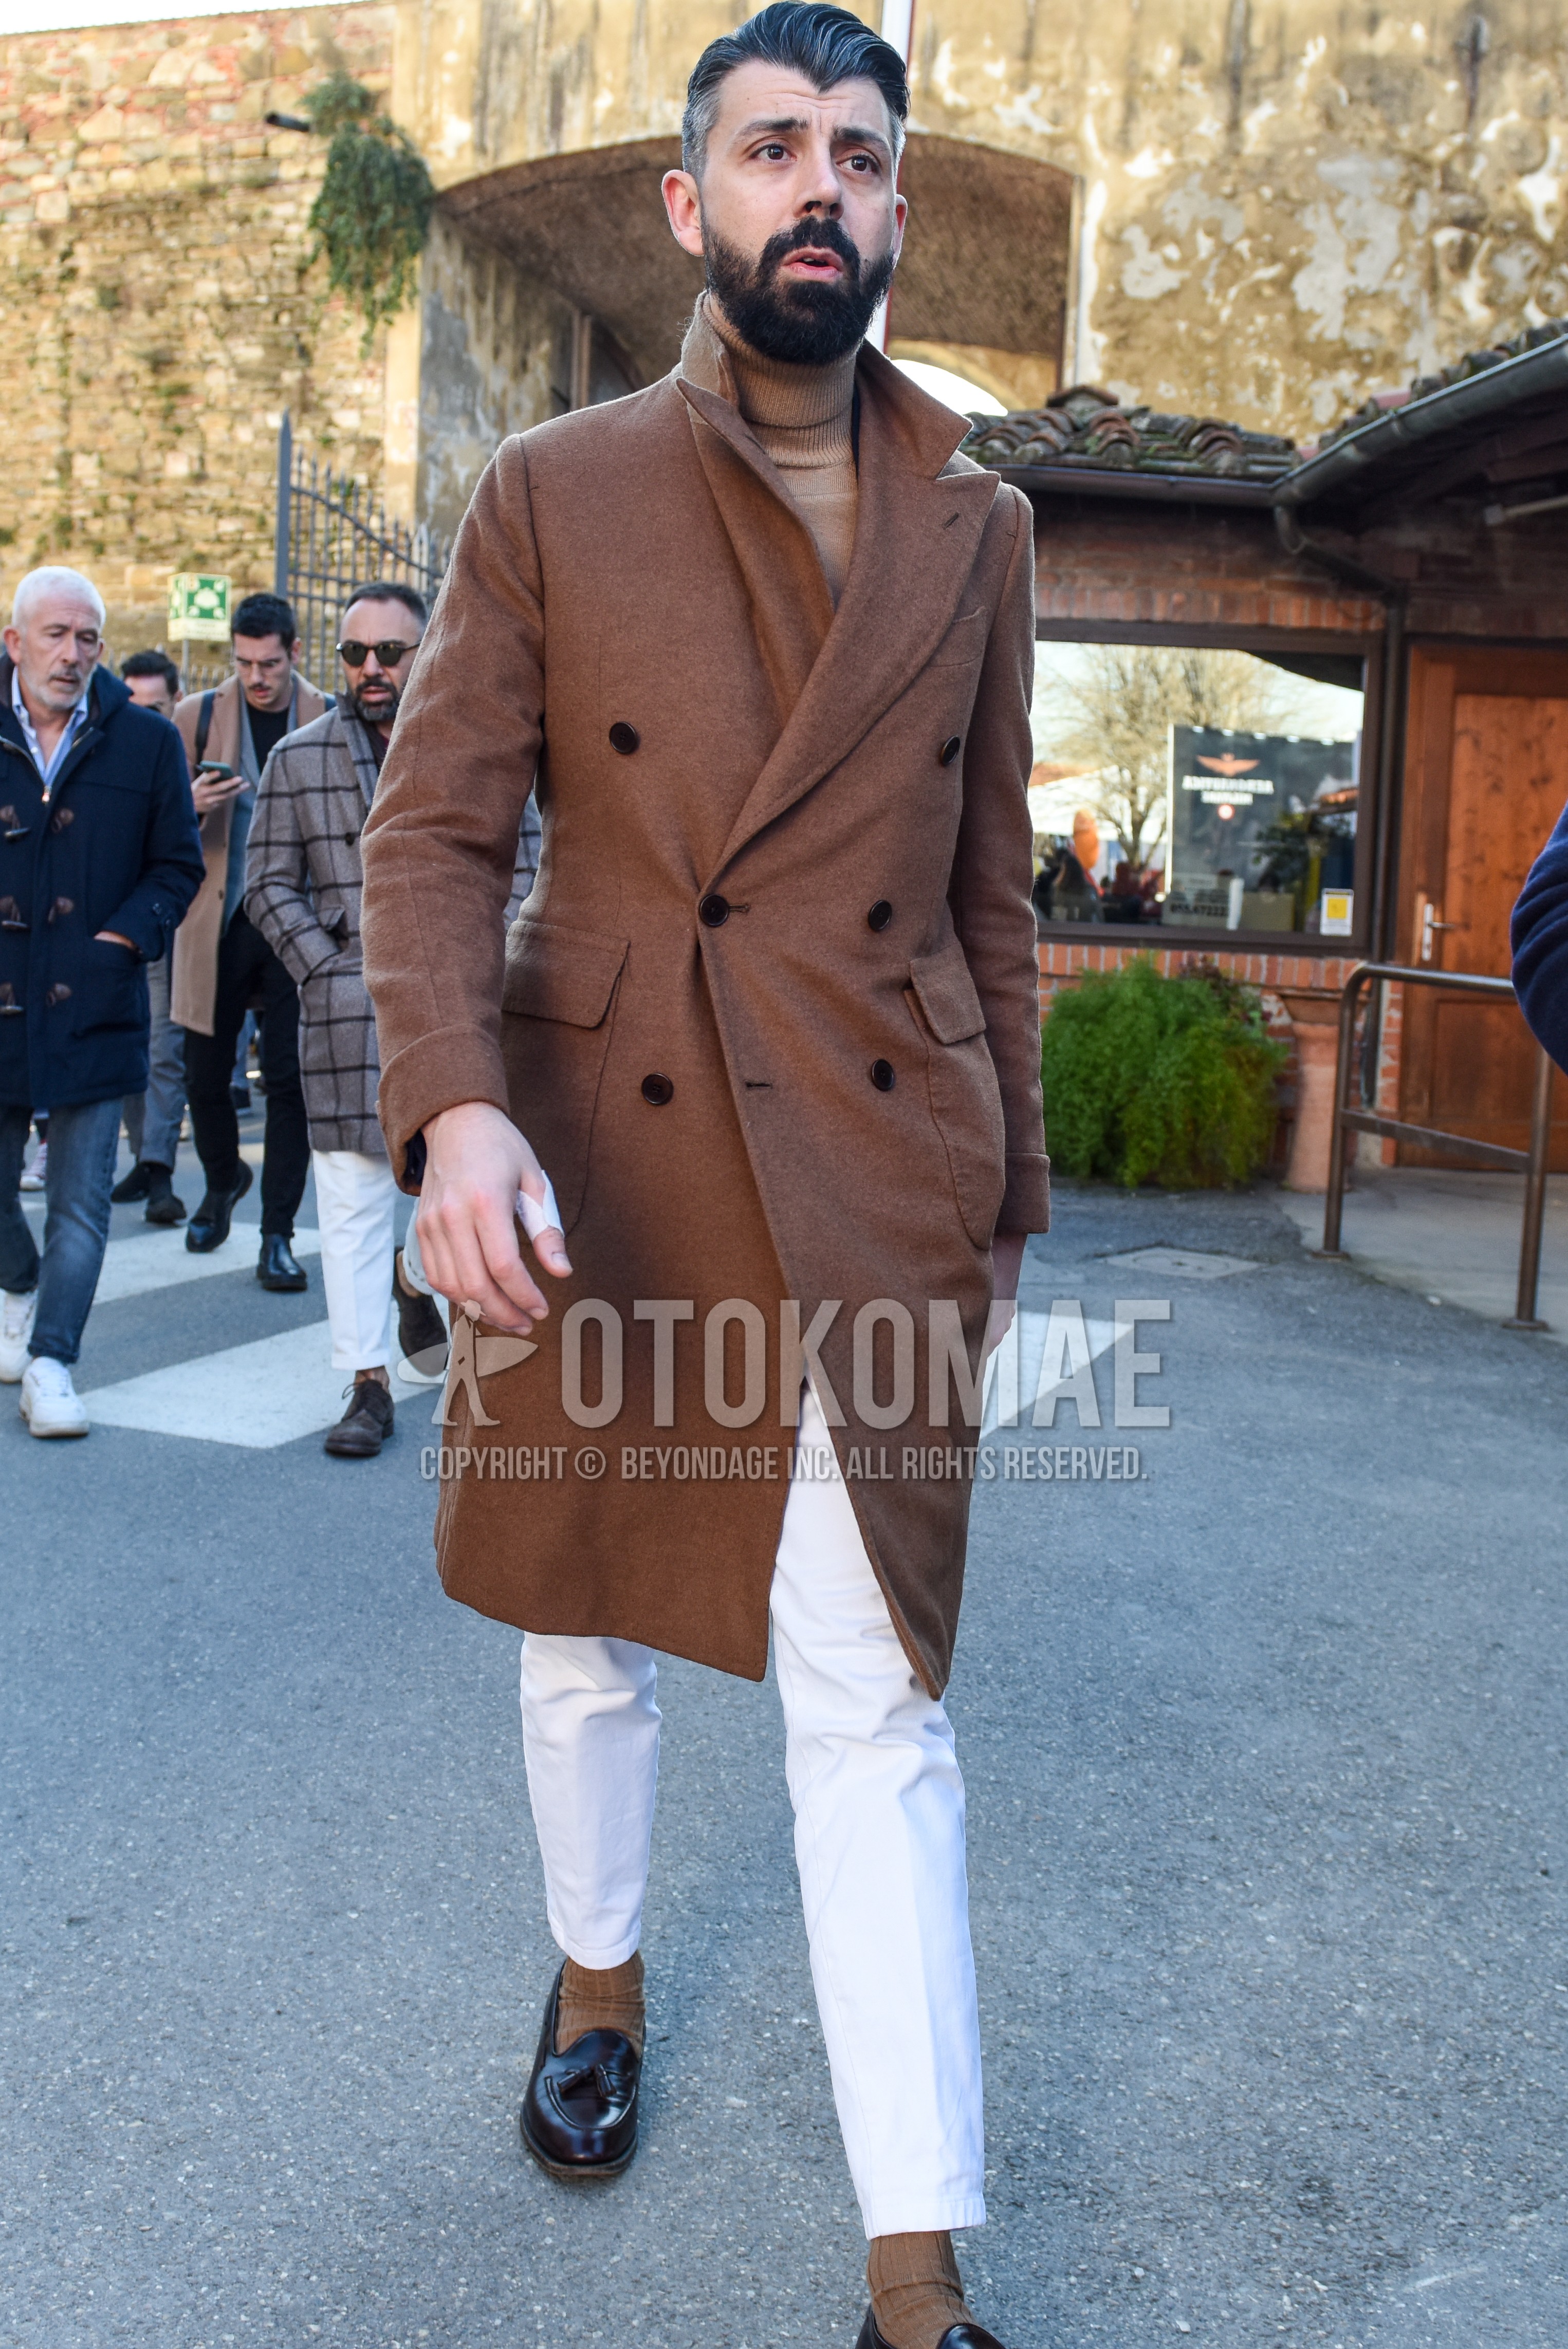 Men's autumn winter outfit with brown plain chester coat, beige plain turtleneck knit, white plain cotton pants, white plain ankle pants, beige plain socks, brown tassel loafers leather shoes.